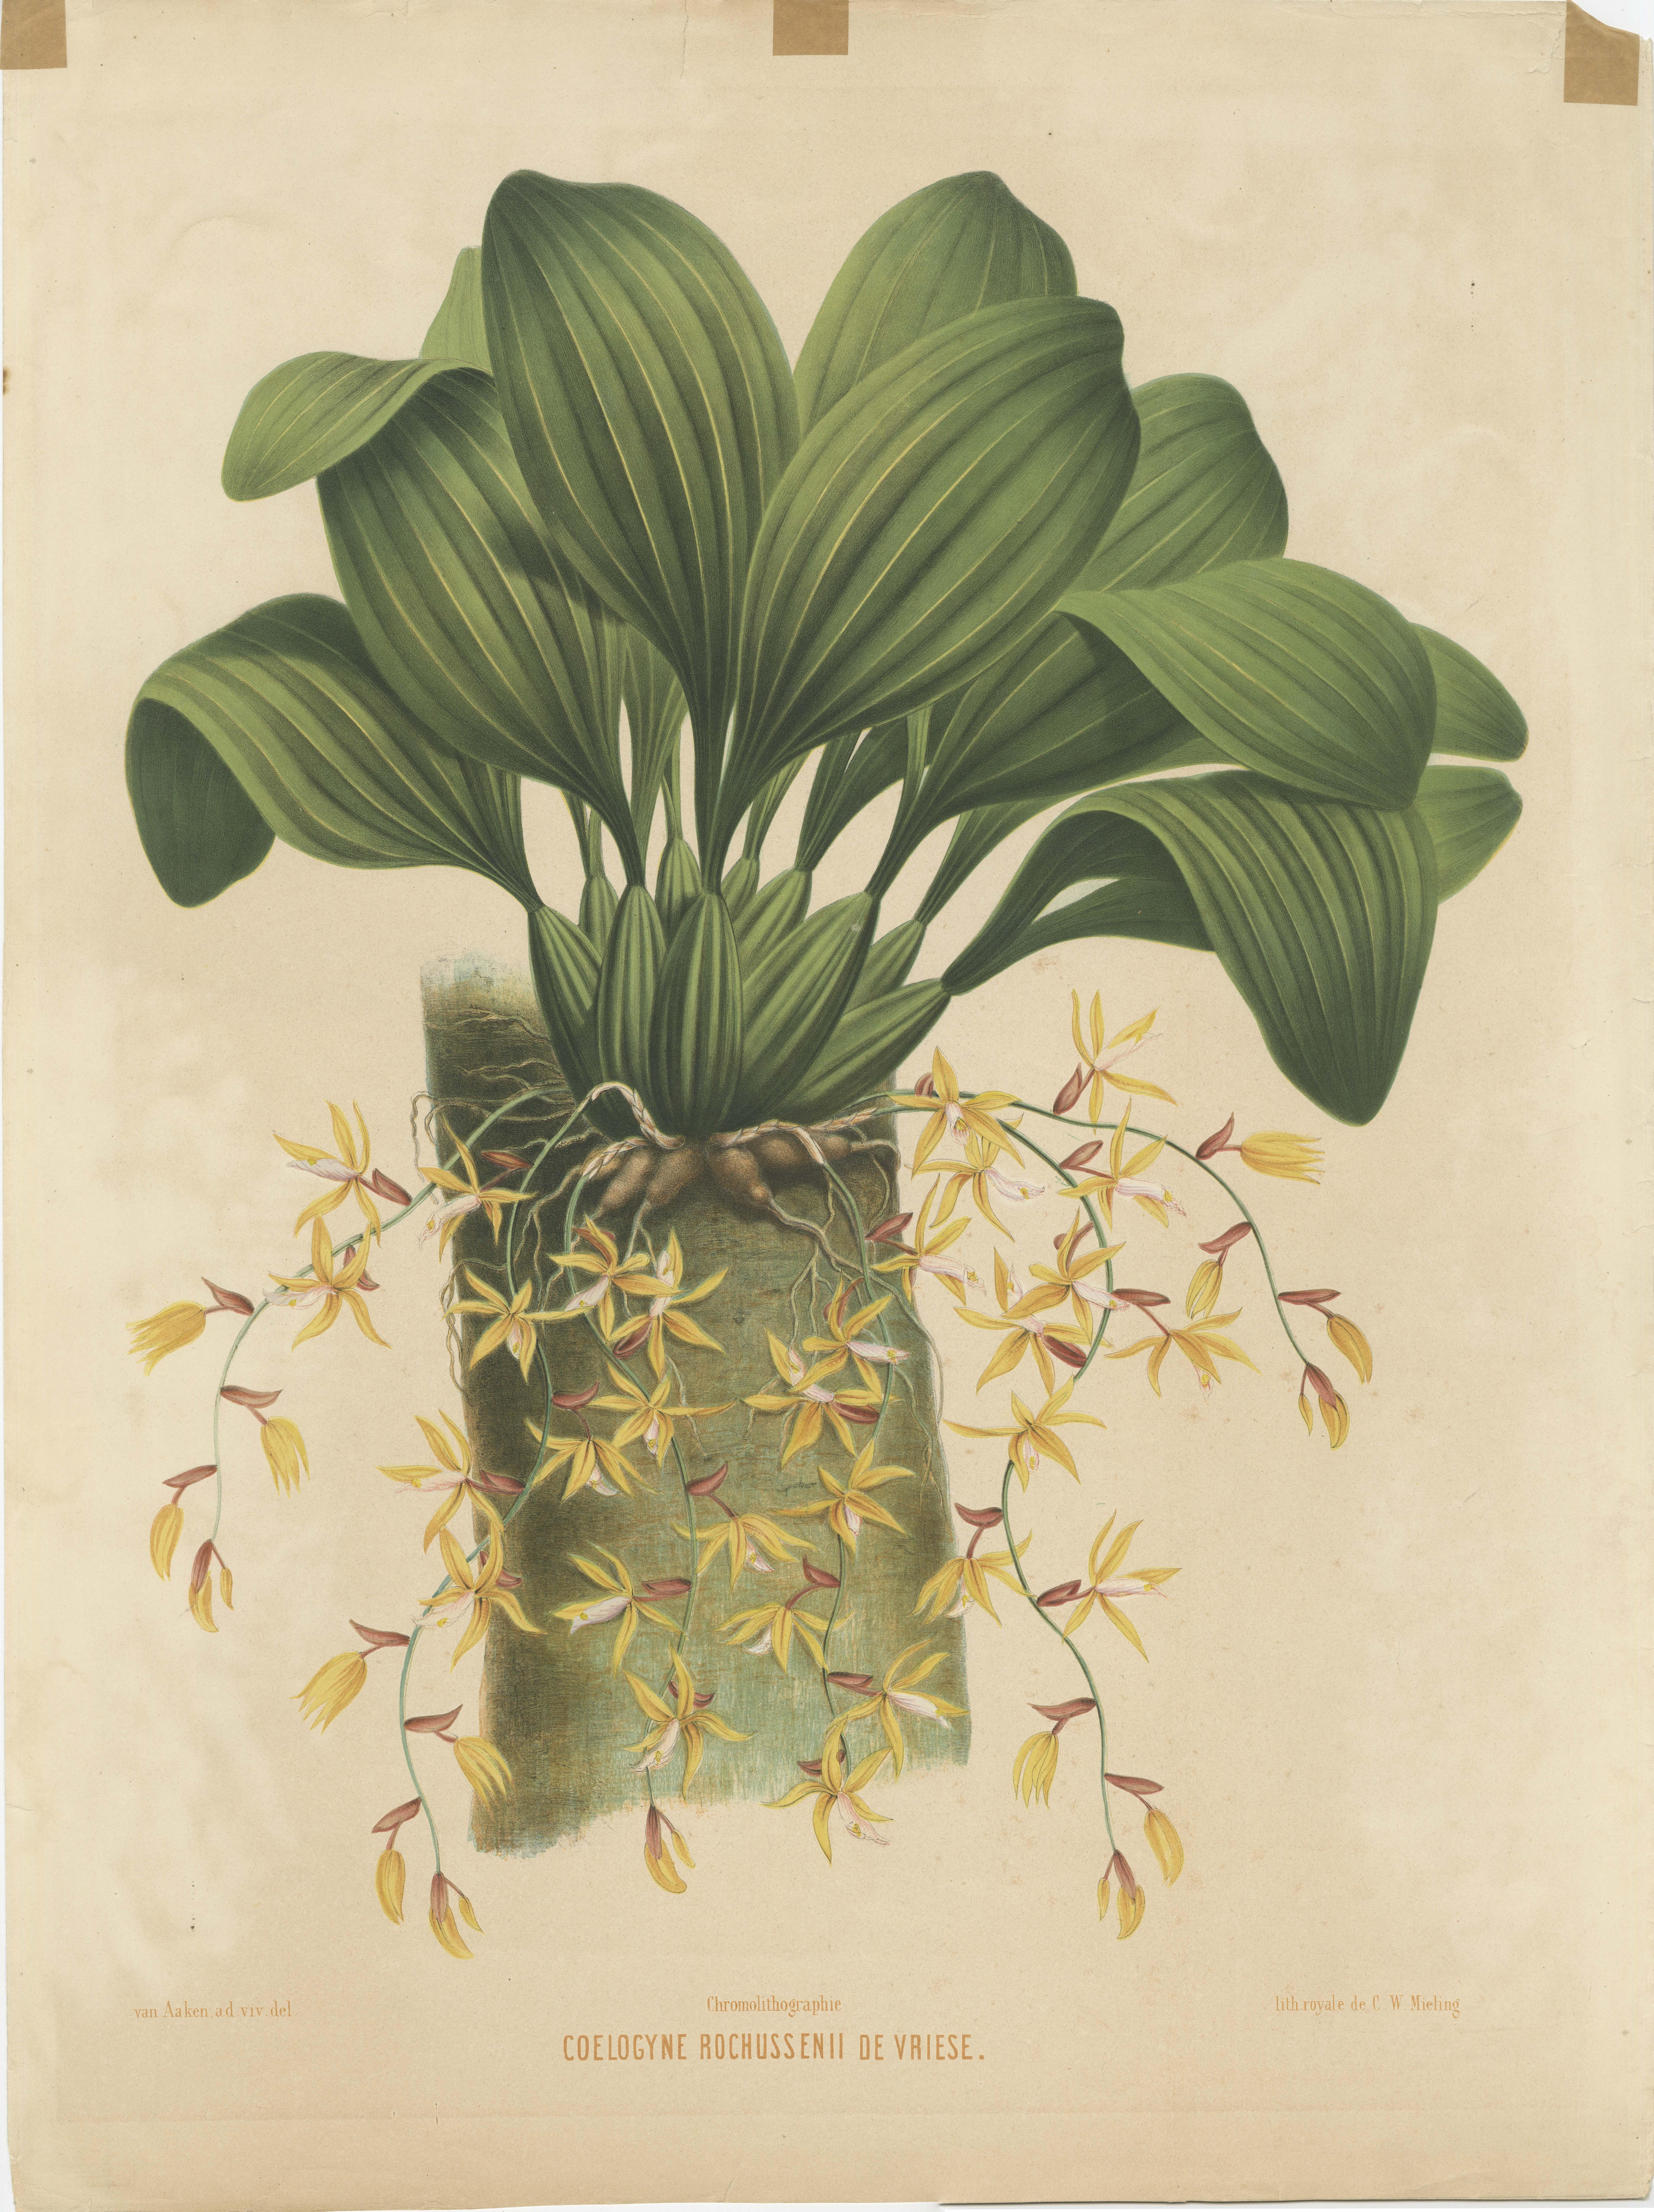 A large and rare original chromolithographic plate from a significant 19th-century botanical work on orchids from the Dutch East Indies (now Indonesia). 

It is taken from the book titled 